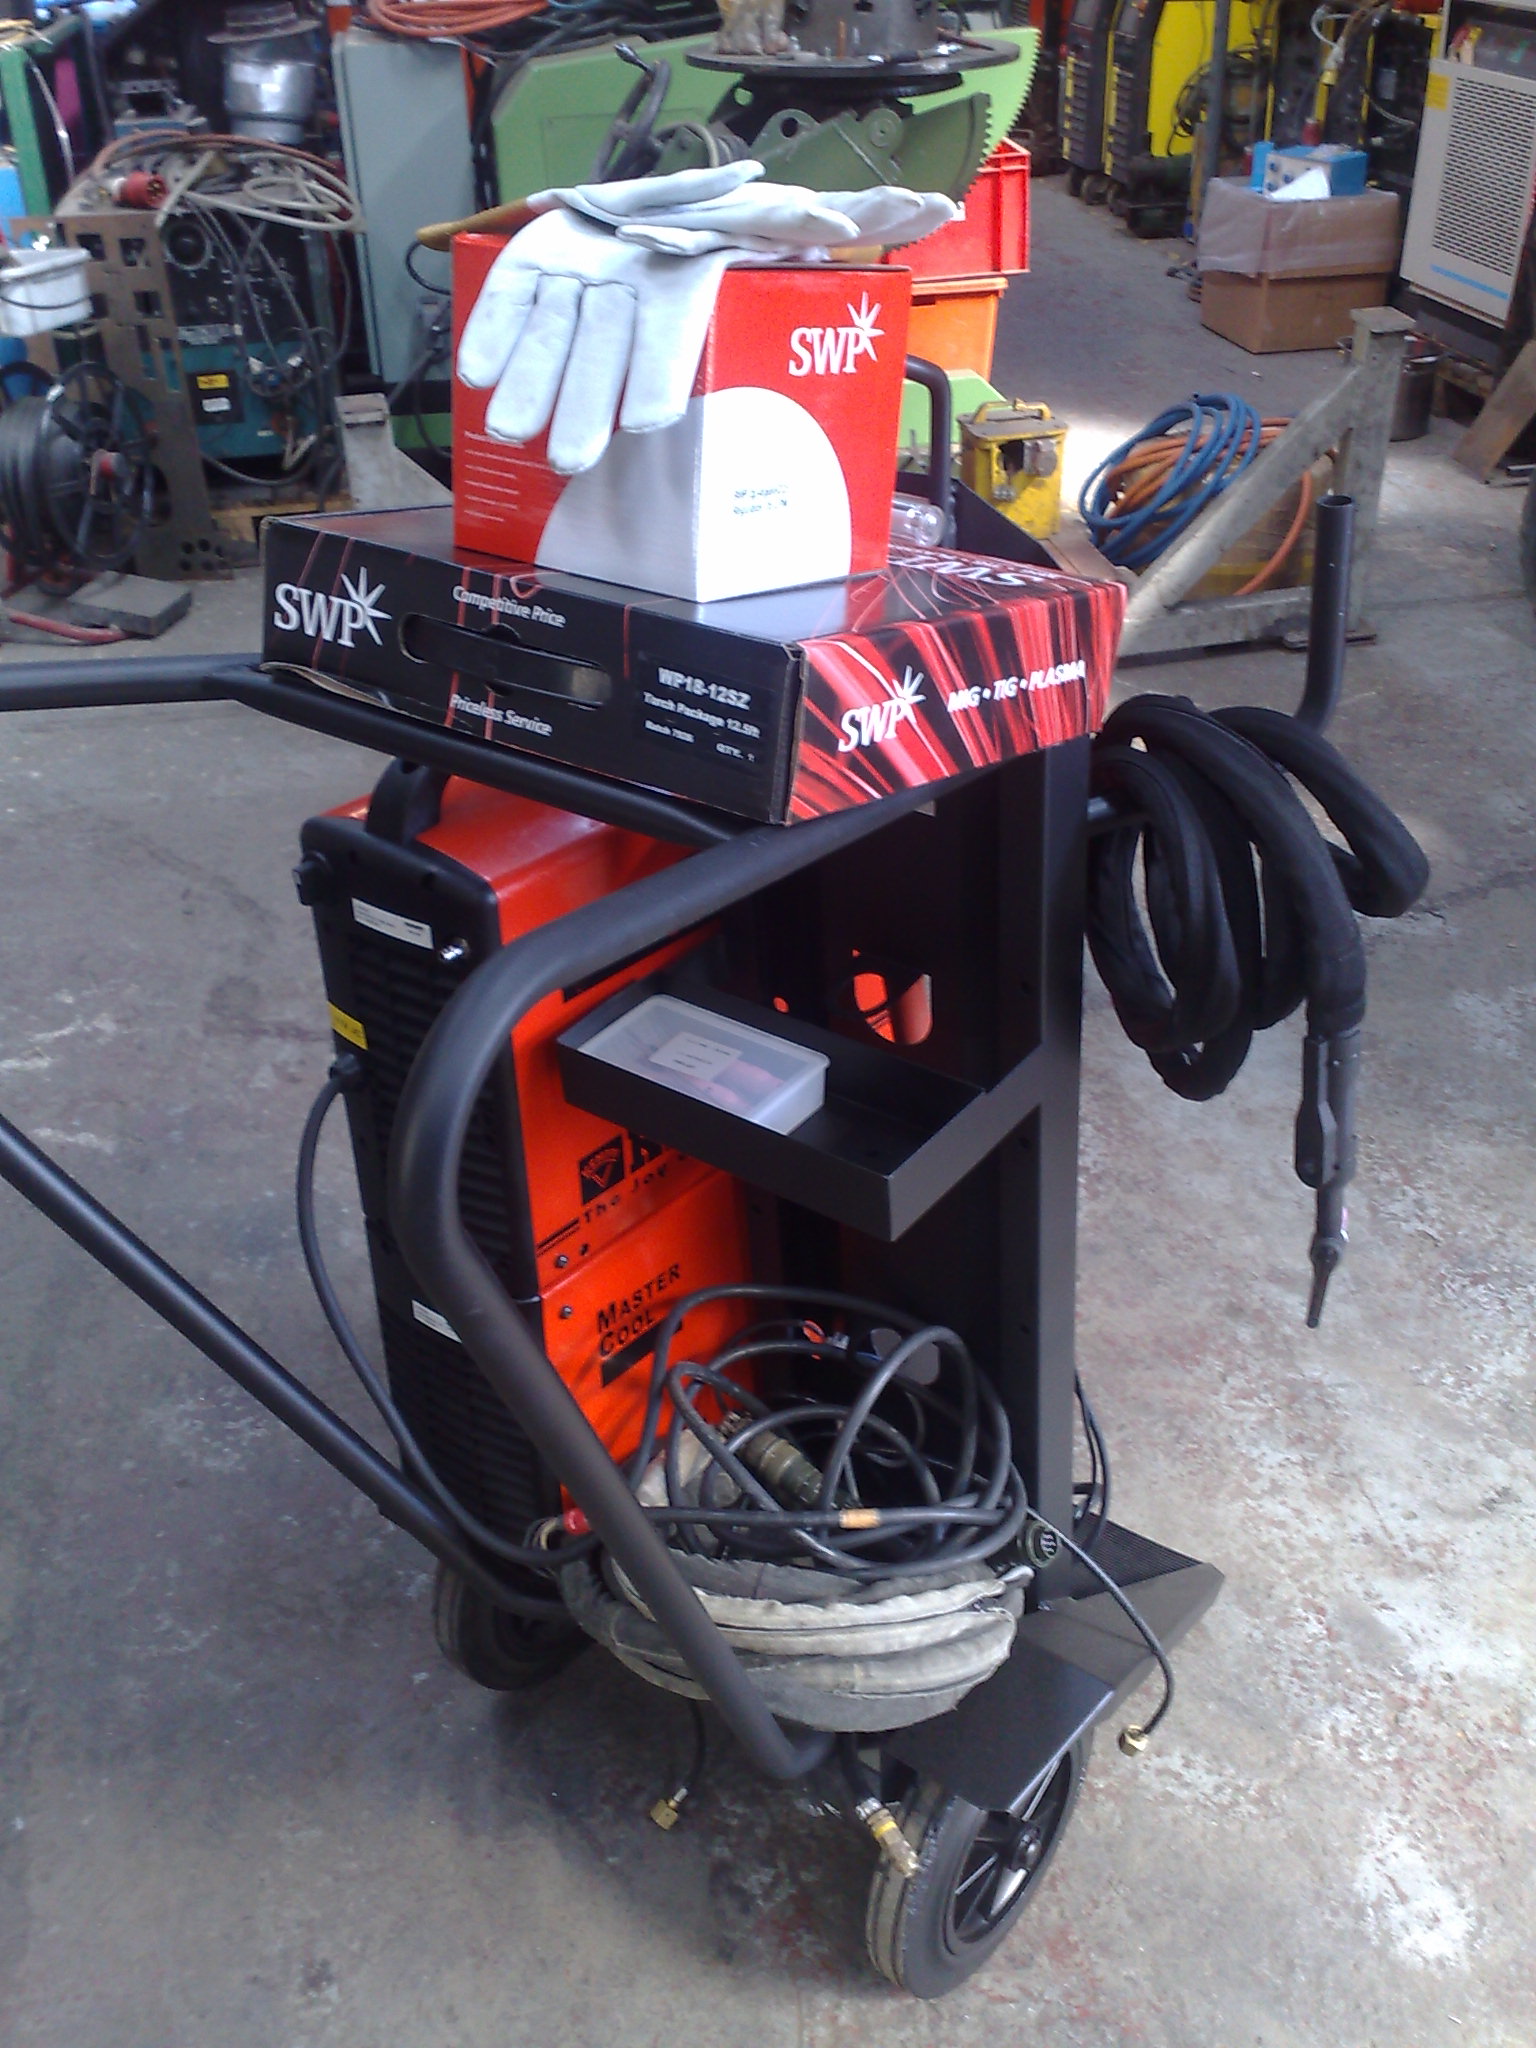 Sold to Africa a Kemppi welding machine Full package